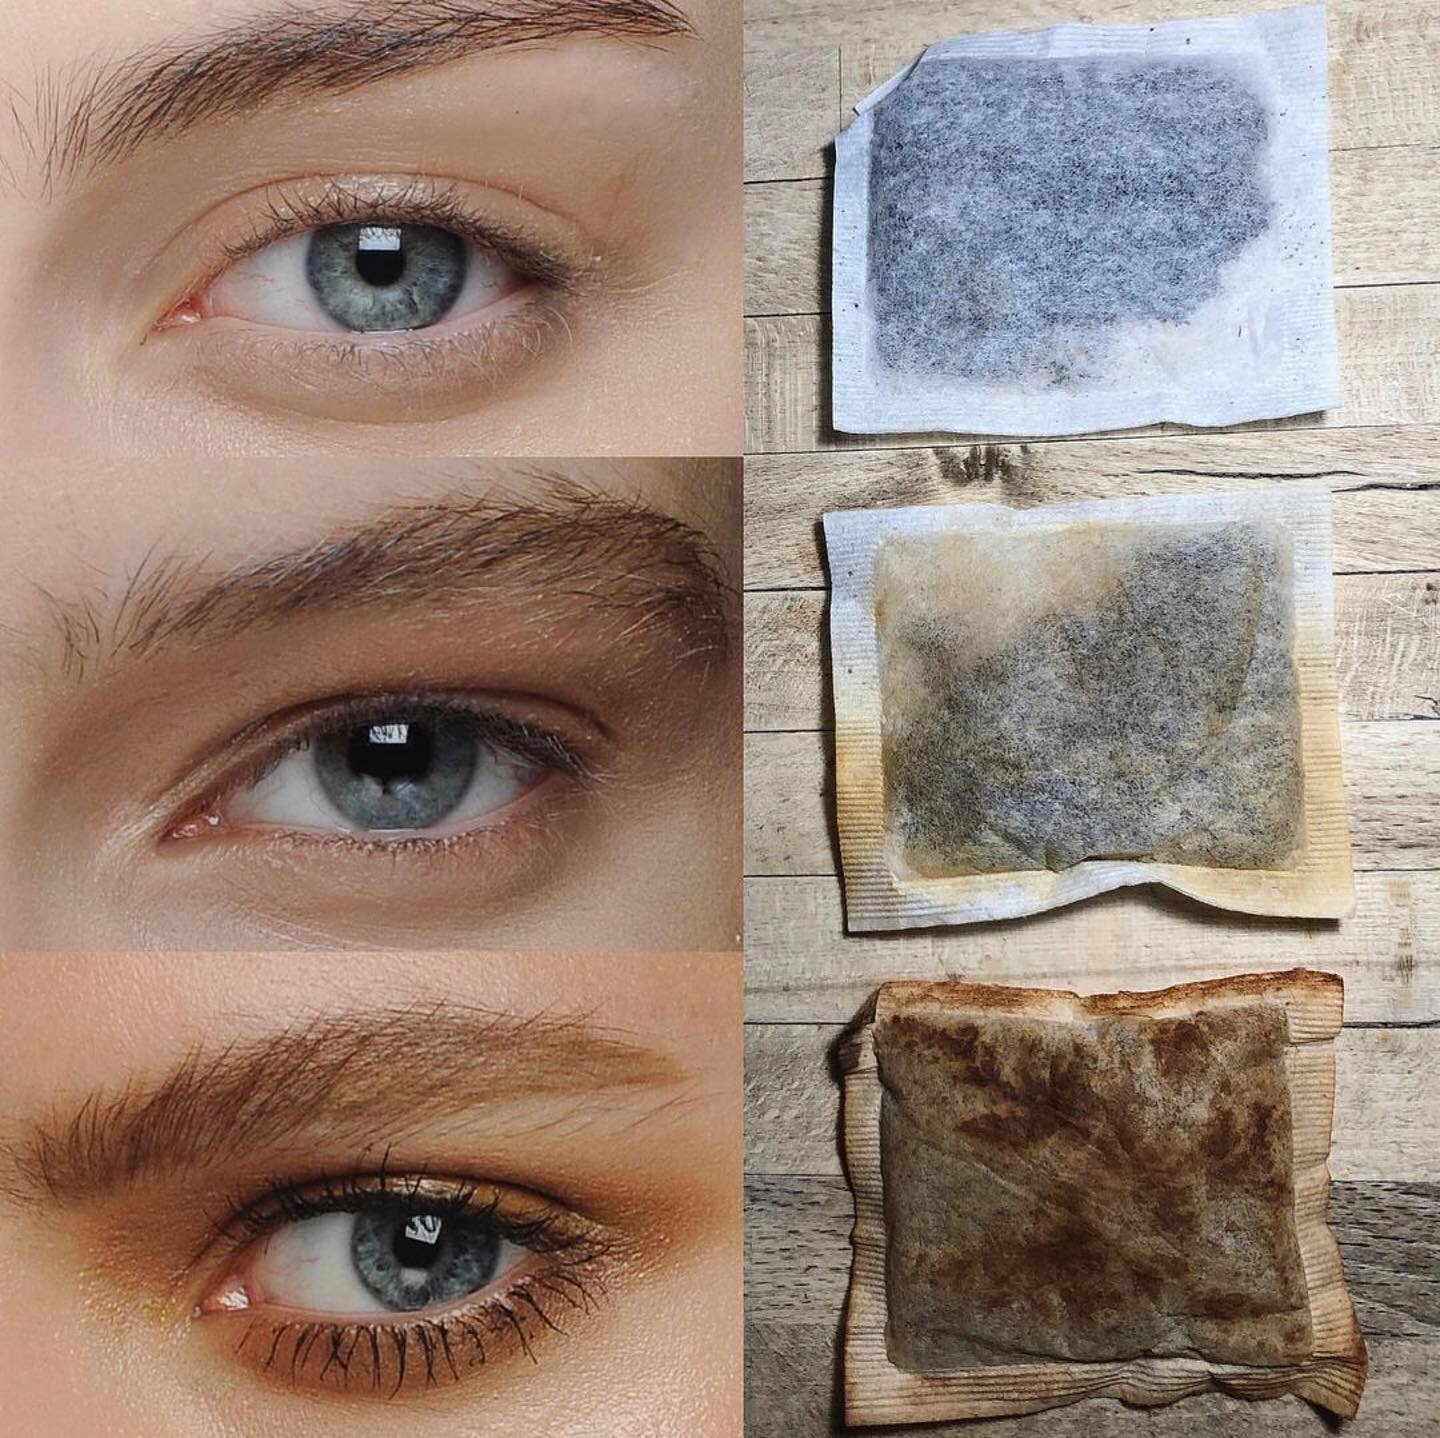 TEA BAGS: What&rsquo;s not celebrated enough in makeup artistry is the attention to detail given to doing very little. MAC Eyeshadows in Omega, Soba and Uninterrupted. 🫖🌱 

The bags are Yorkshire if you&rsquo;re wondering. 

Via @terrybarberonbeaut